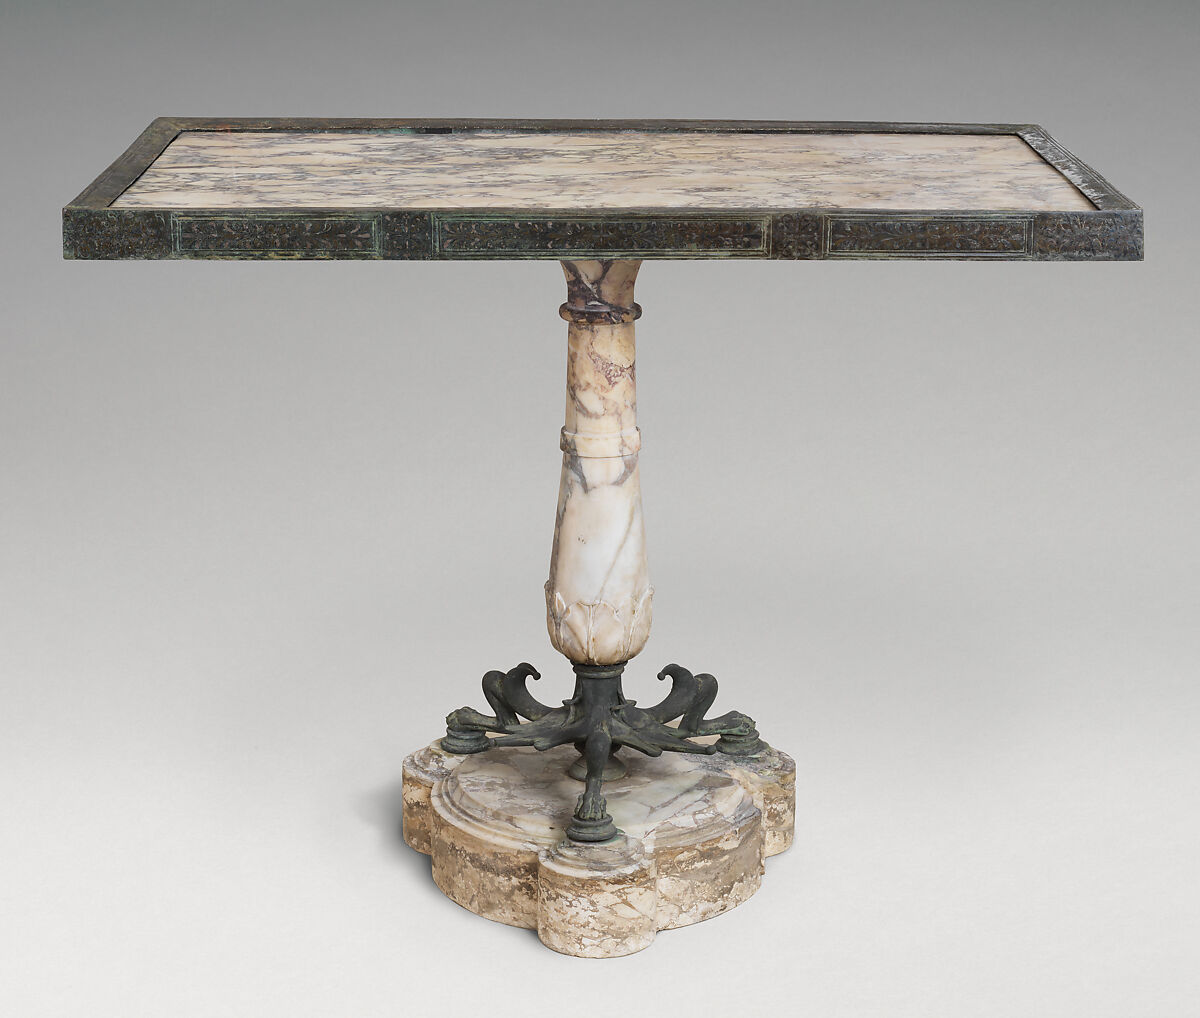 Marble and bronze table, Marble and bronze, Roman 